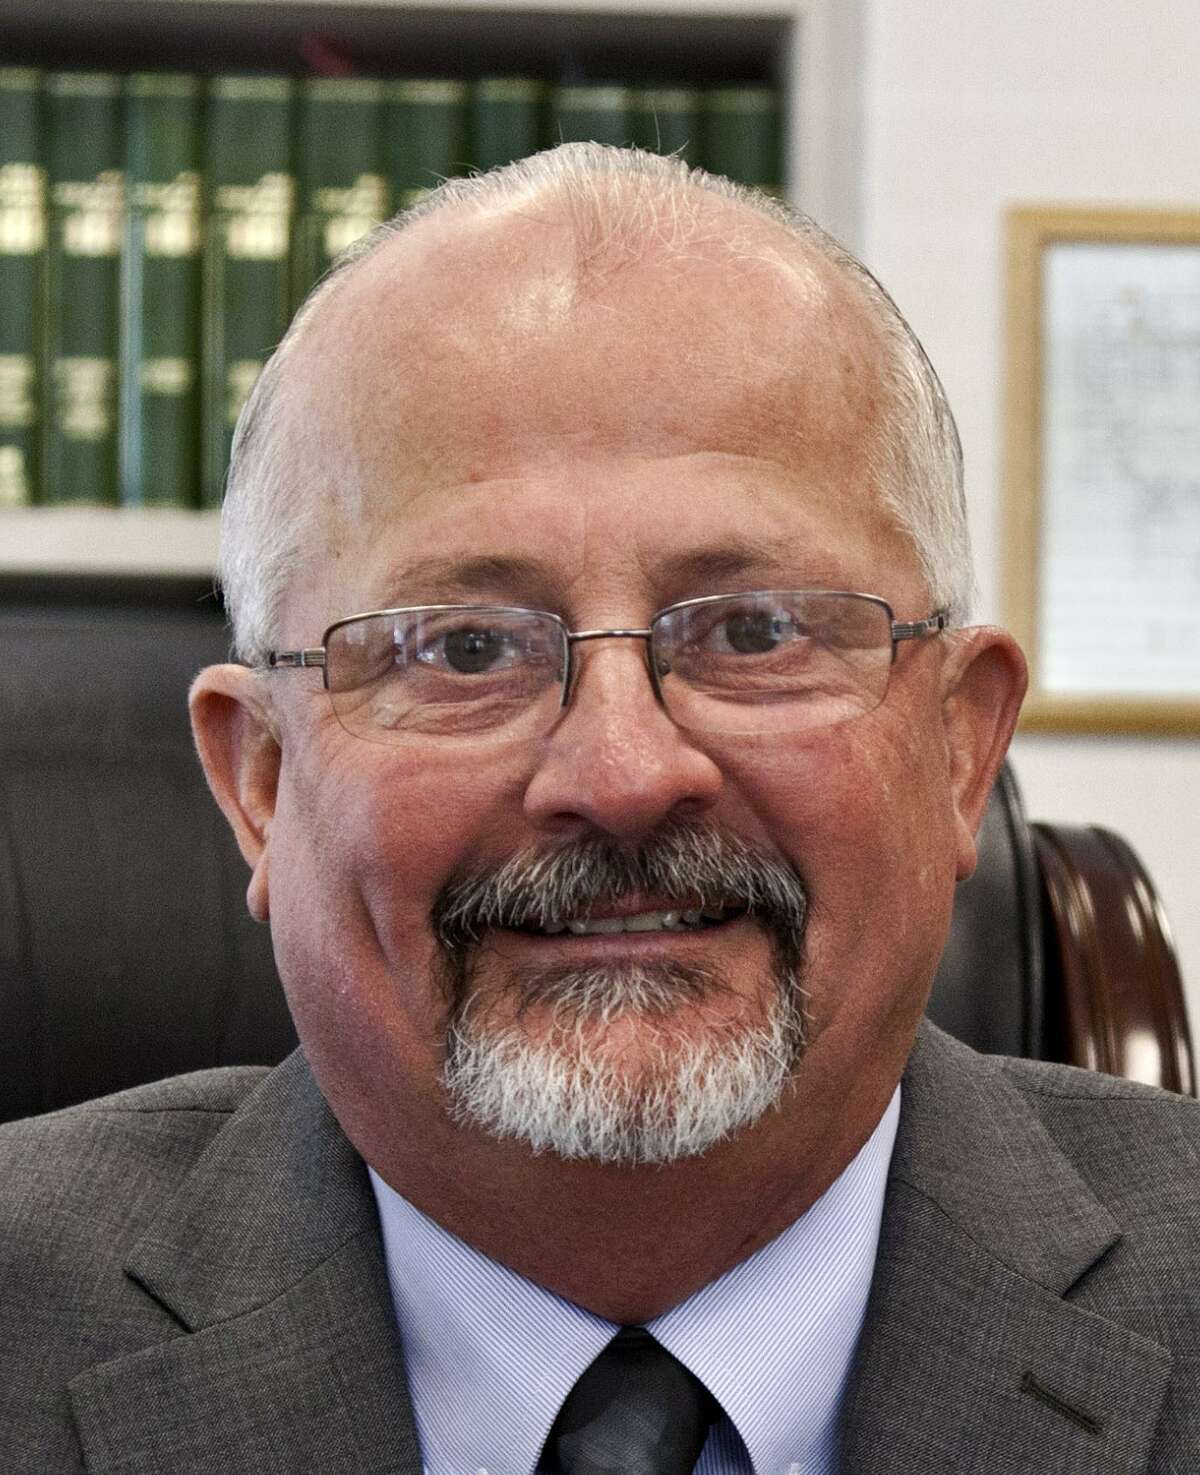 Kendall County Judge Darrel Lux said commissioners “decided to set aside some money for midyear adjustments, if needed” in response to a yet-to-be-finished compensation study by MGT Consulting.